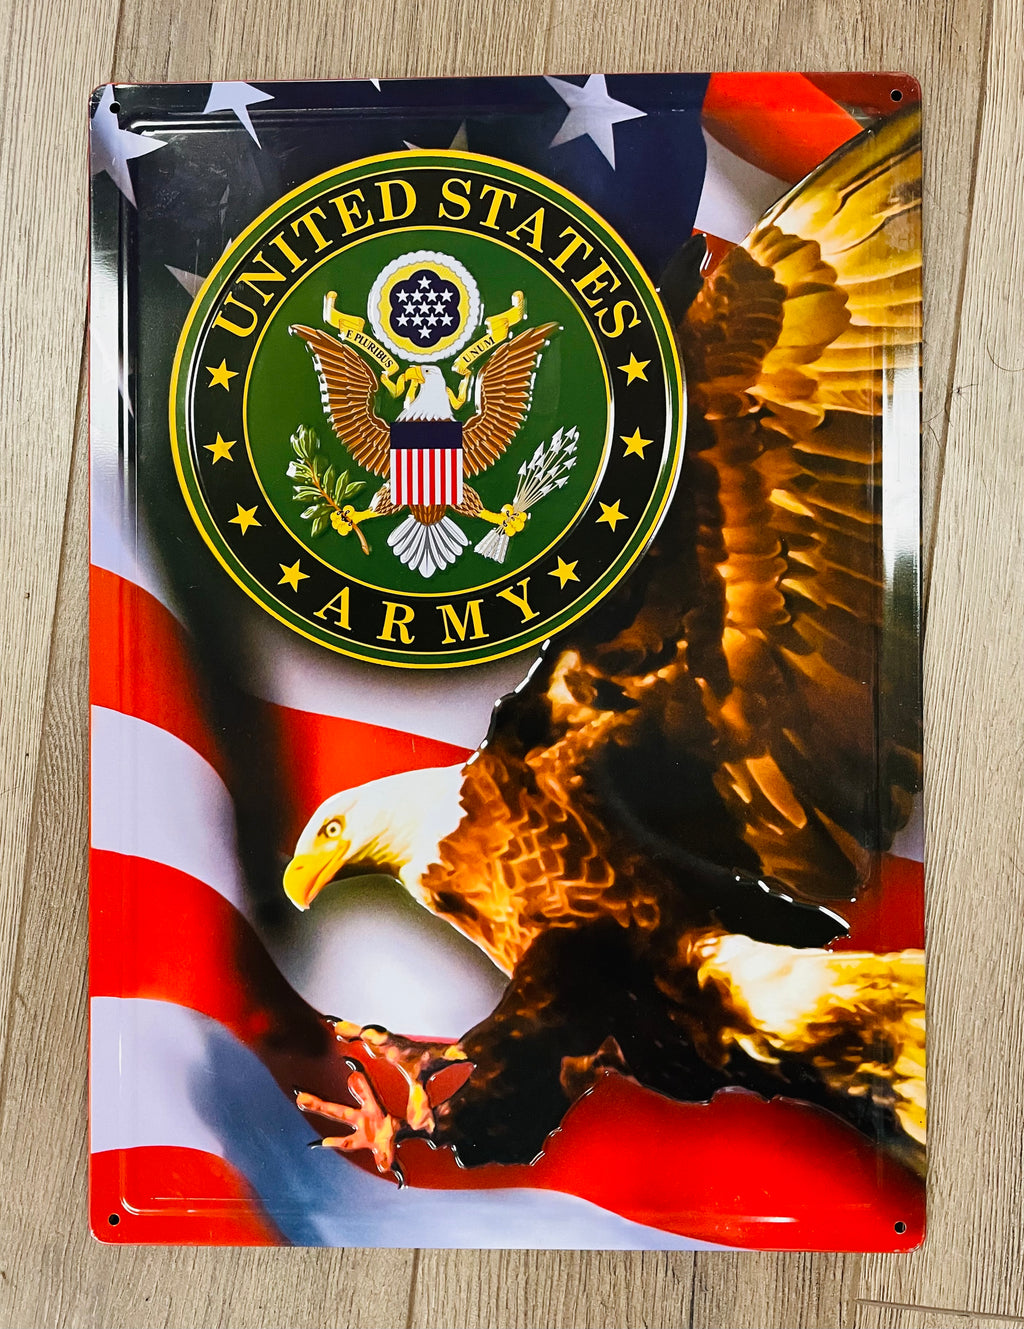 United States Army Metal Novelty Sign